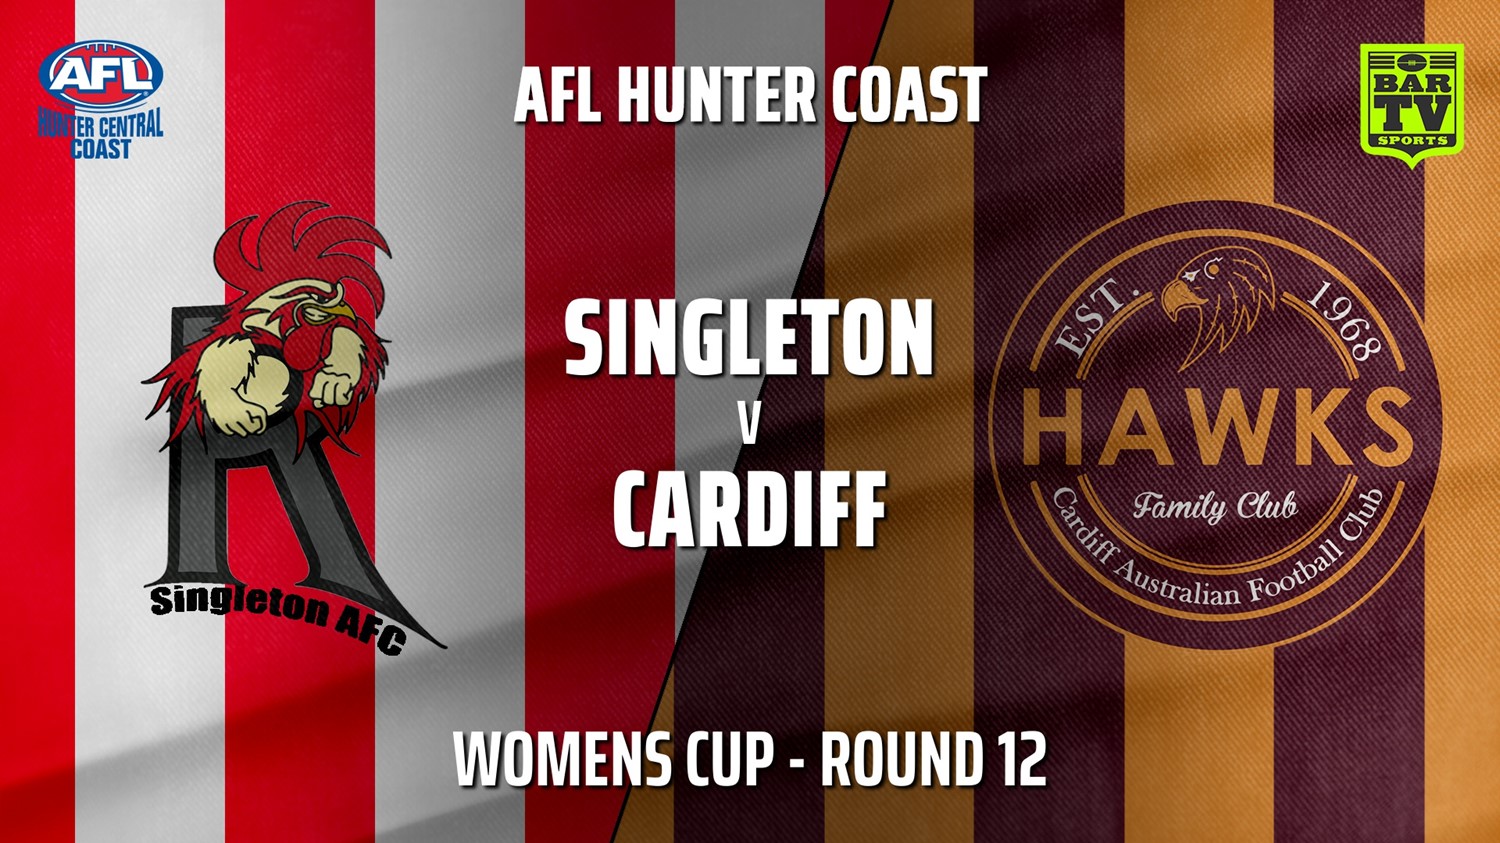 MINI GAME: AFL Hunter Central Coast Round 12 - Womens Cup - Singleton Roosters v Cardiff Hawks Slate Image